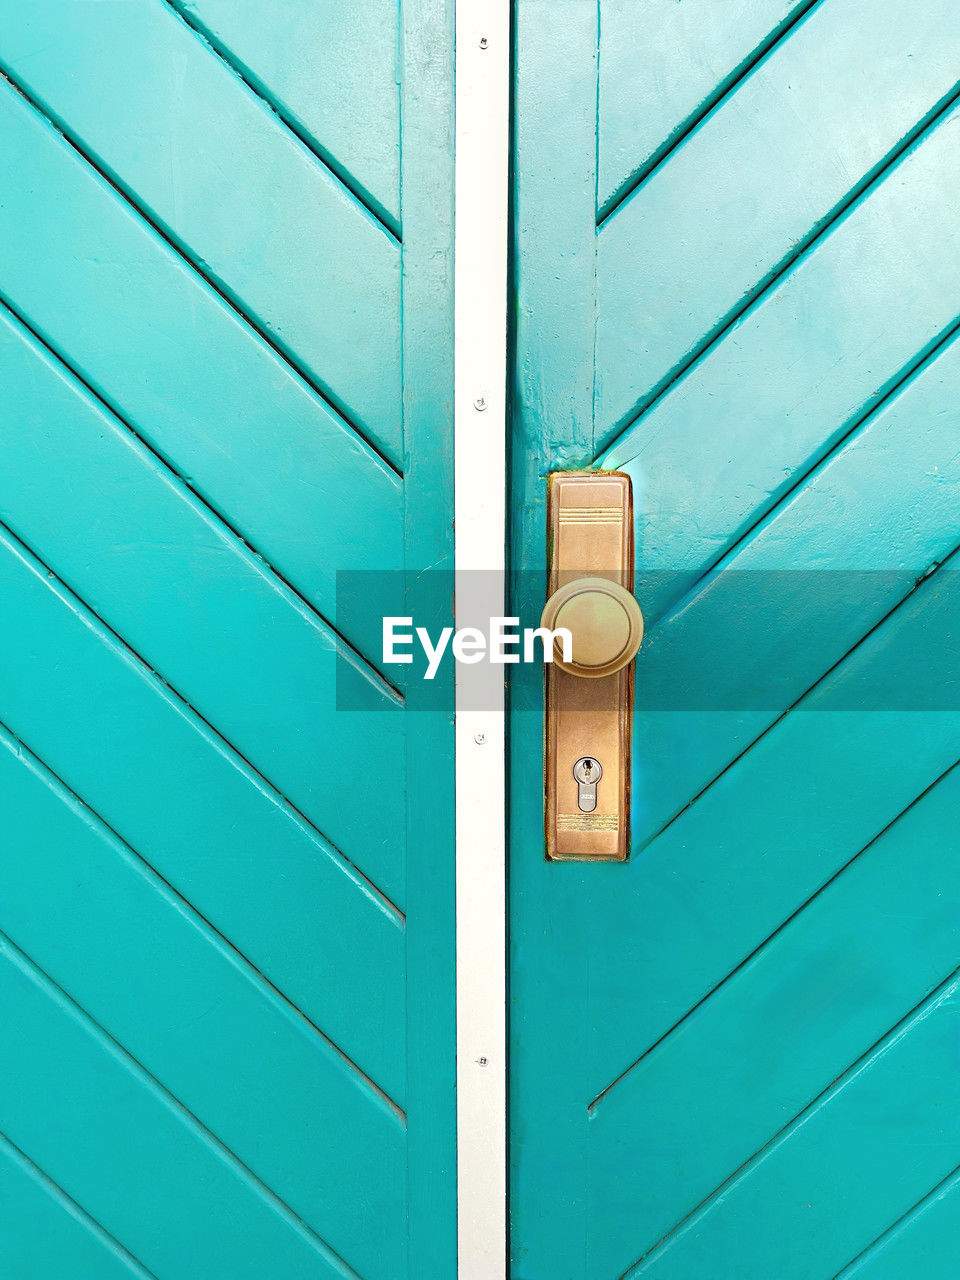 door, entrance, blue, closed, wood, security, protection, no people, green, pattern, full frame, metal, line, backgrounds, lock, architecture, day, turquoise colored, close-up, turquoise, built structure, textured, locker, outdoors, doorknob, keyhole